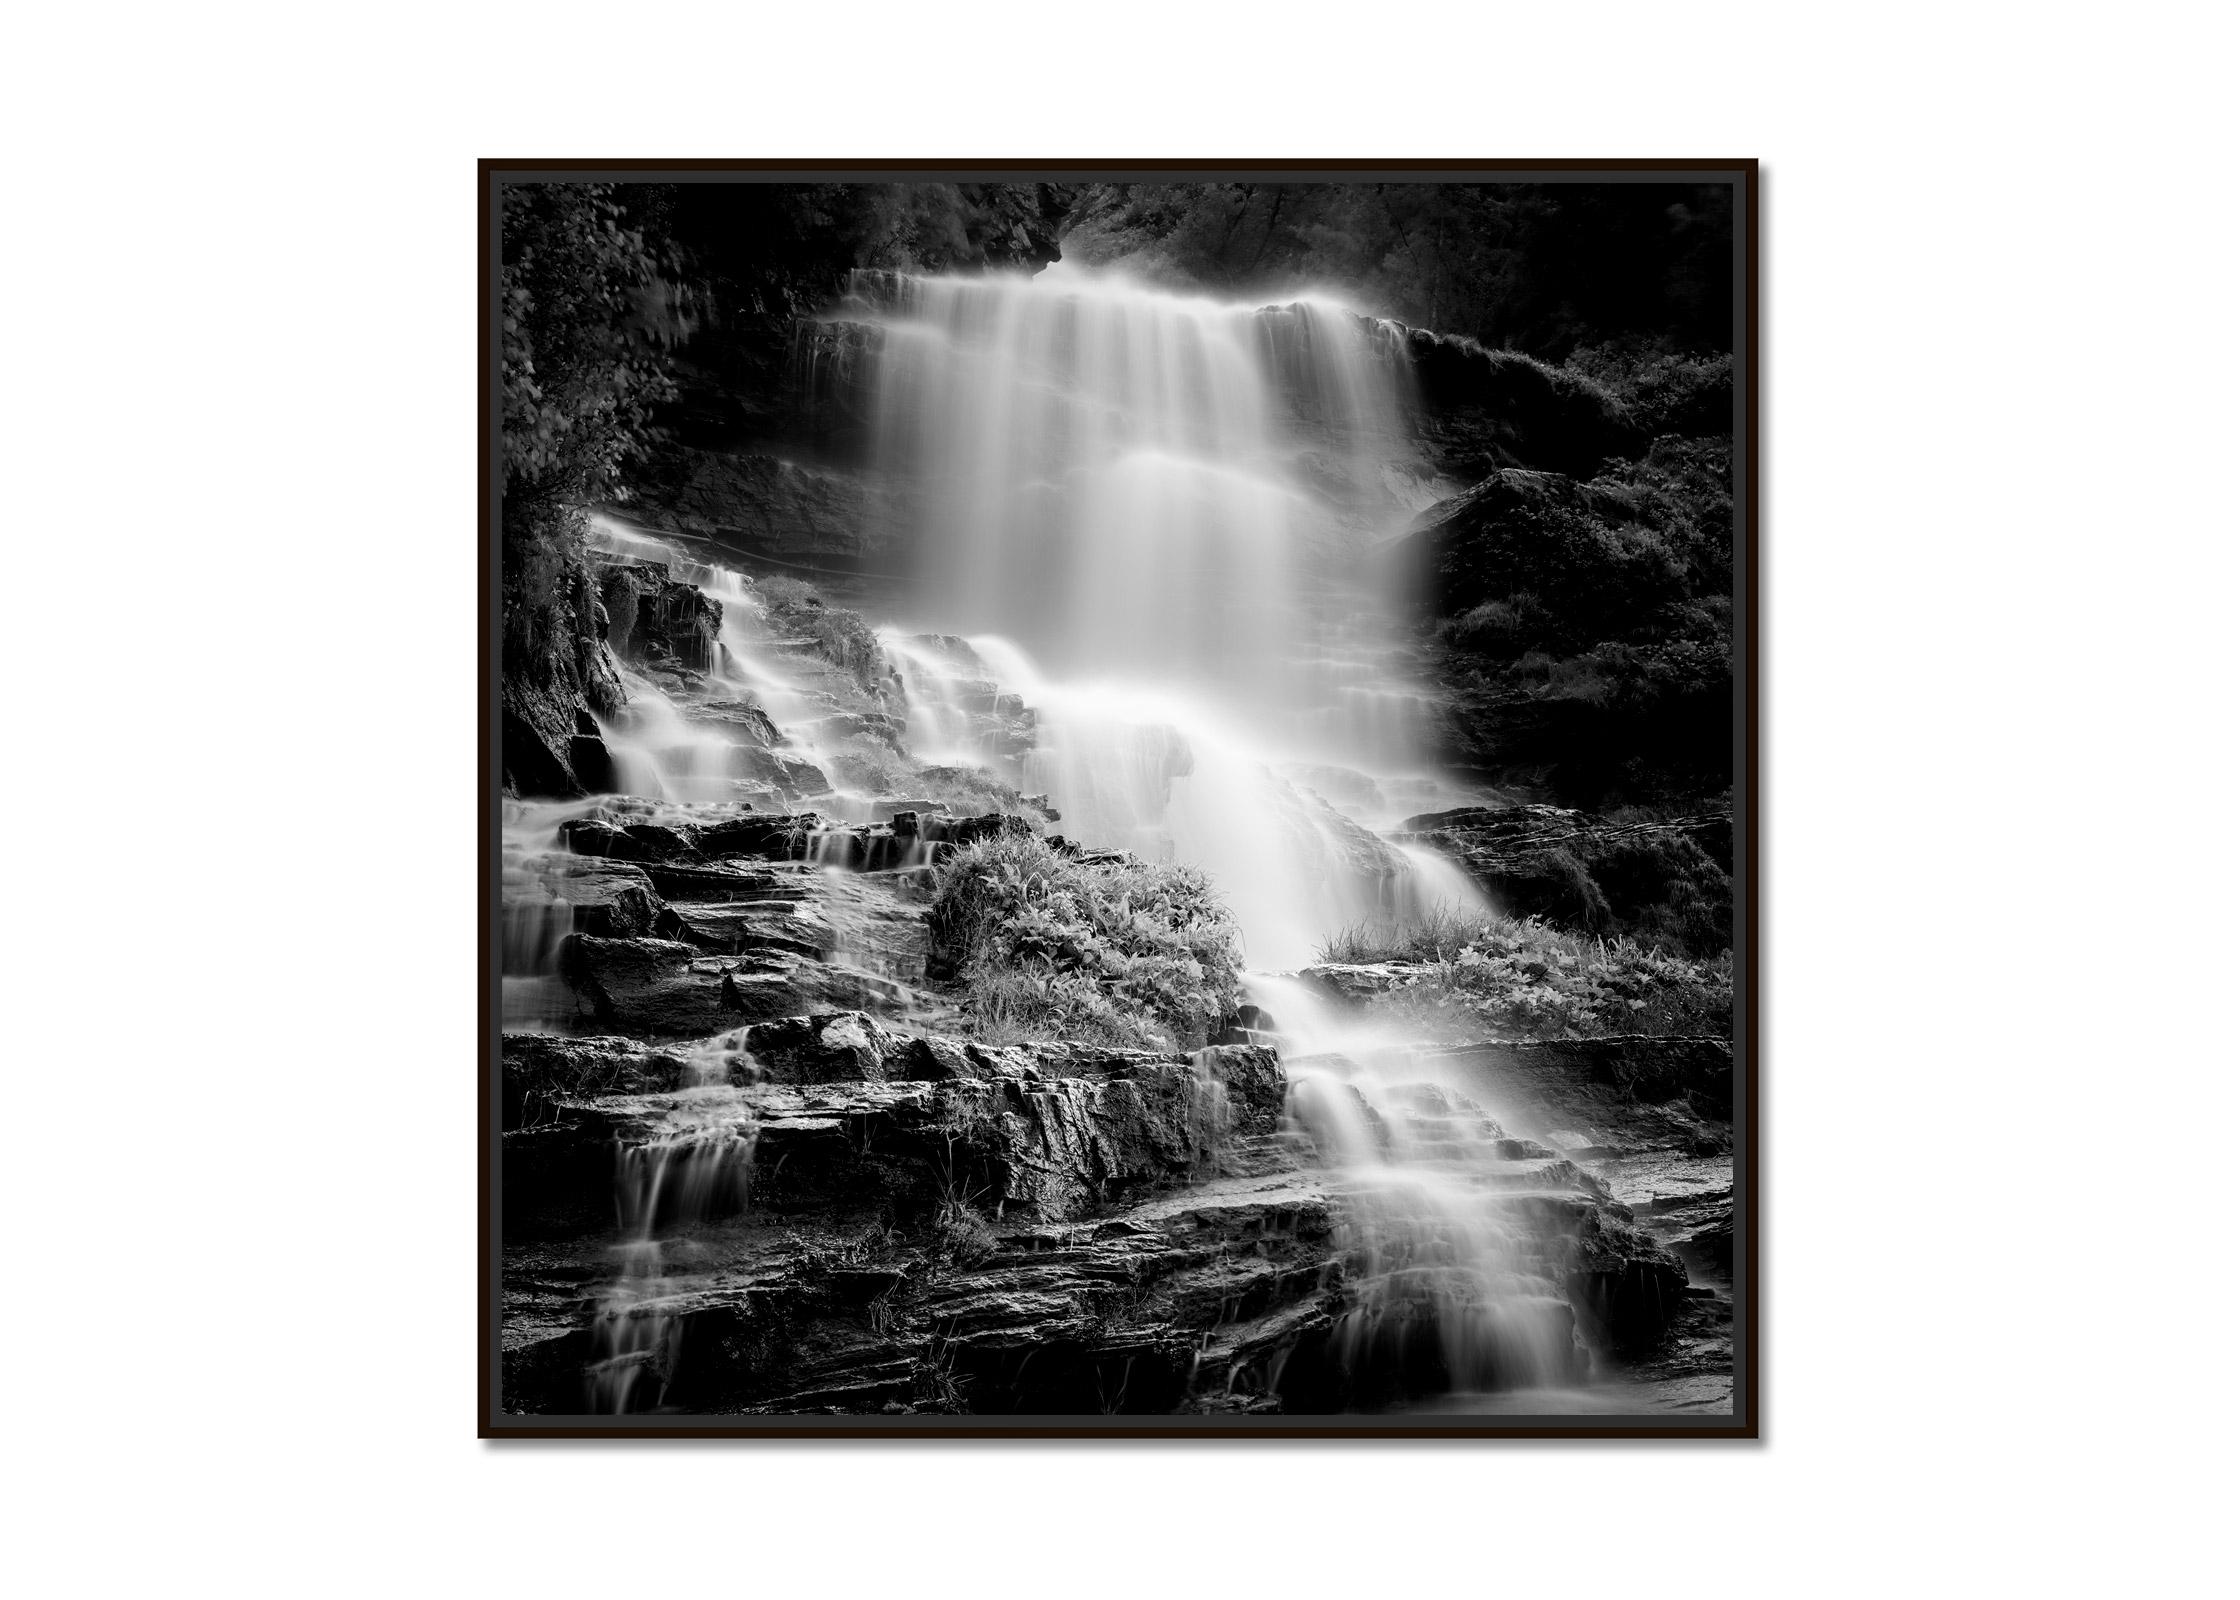 Klockelefall Waterfall, black and white art photography, waterscape, landscape  - Photograph by Gerald Berghammer